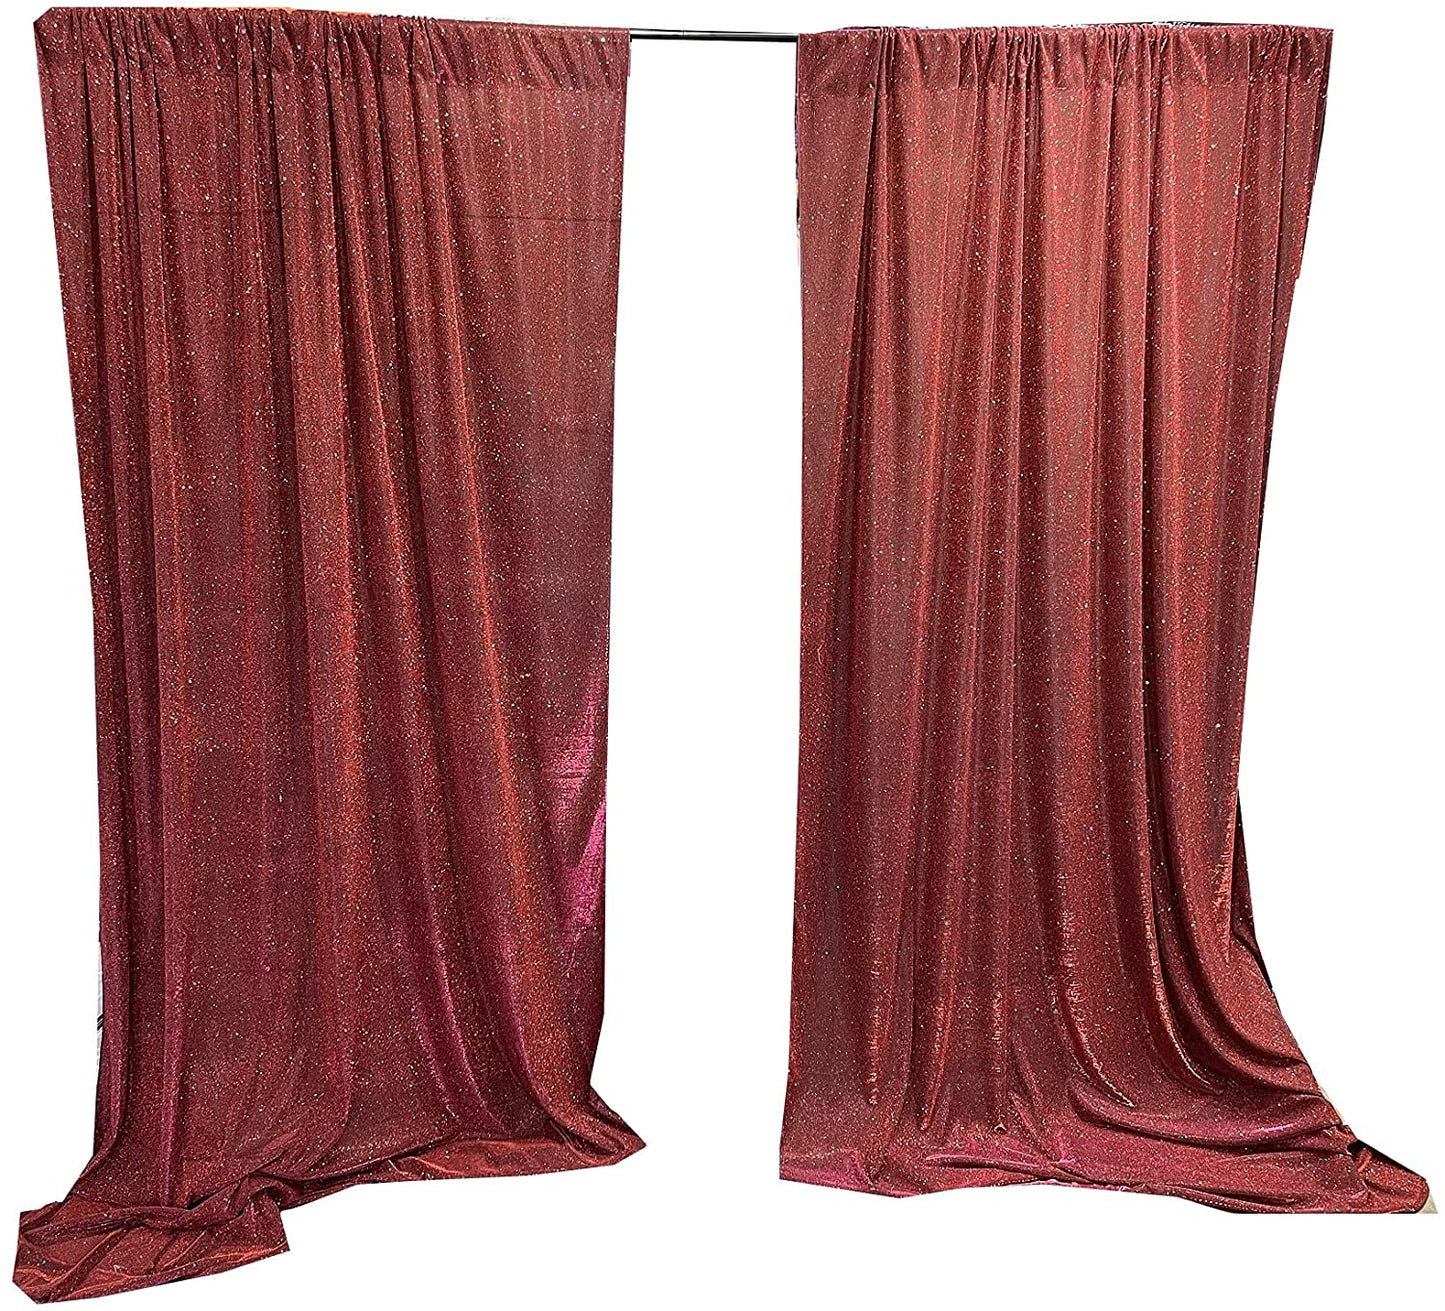 Full Covered Glitter Shimmer on Fabric Backdrop Drape - Curtain - Wedding Party Decoration (2 Panels Burgundy